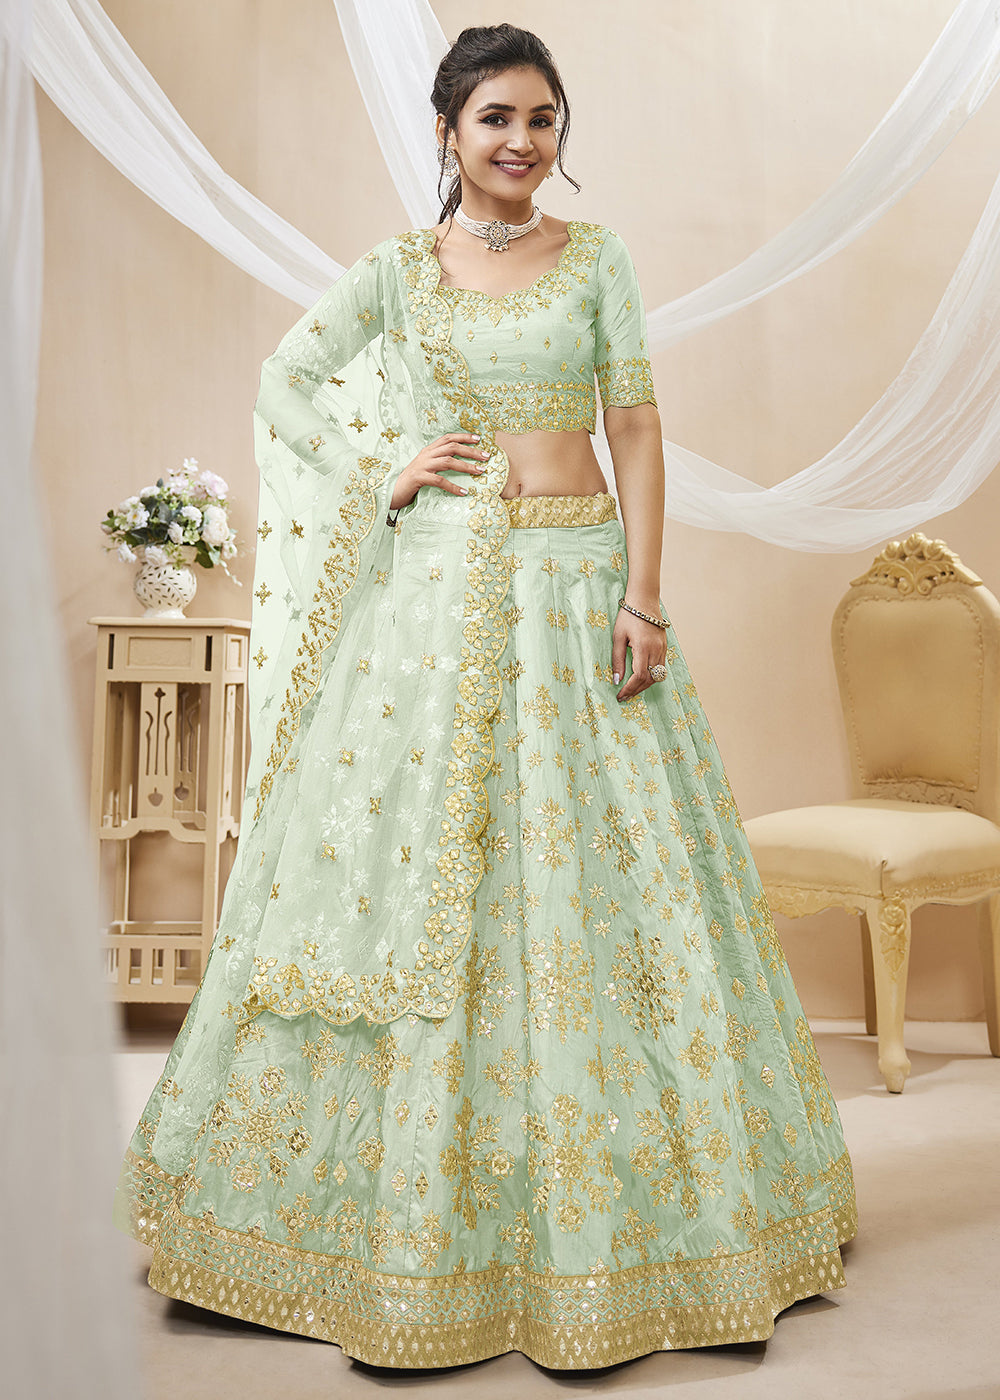 Buy Now Pistachio Green Art Silk Embroidered Reception Wear Lehenga Choli Online in USA, UK, Canada & Worldwide at Empress Clothing.